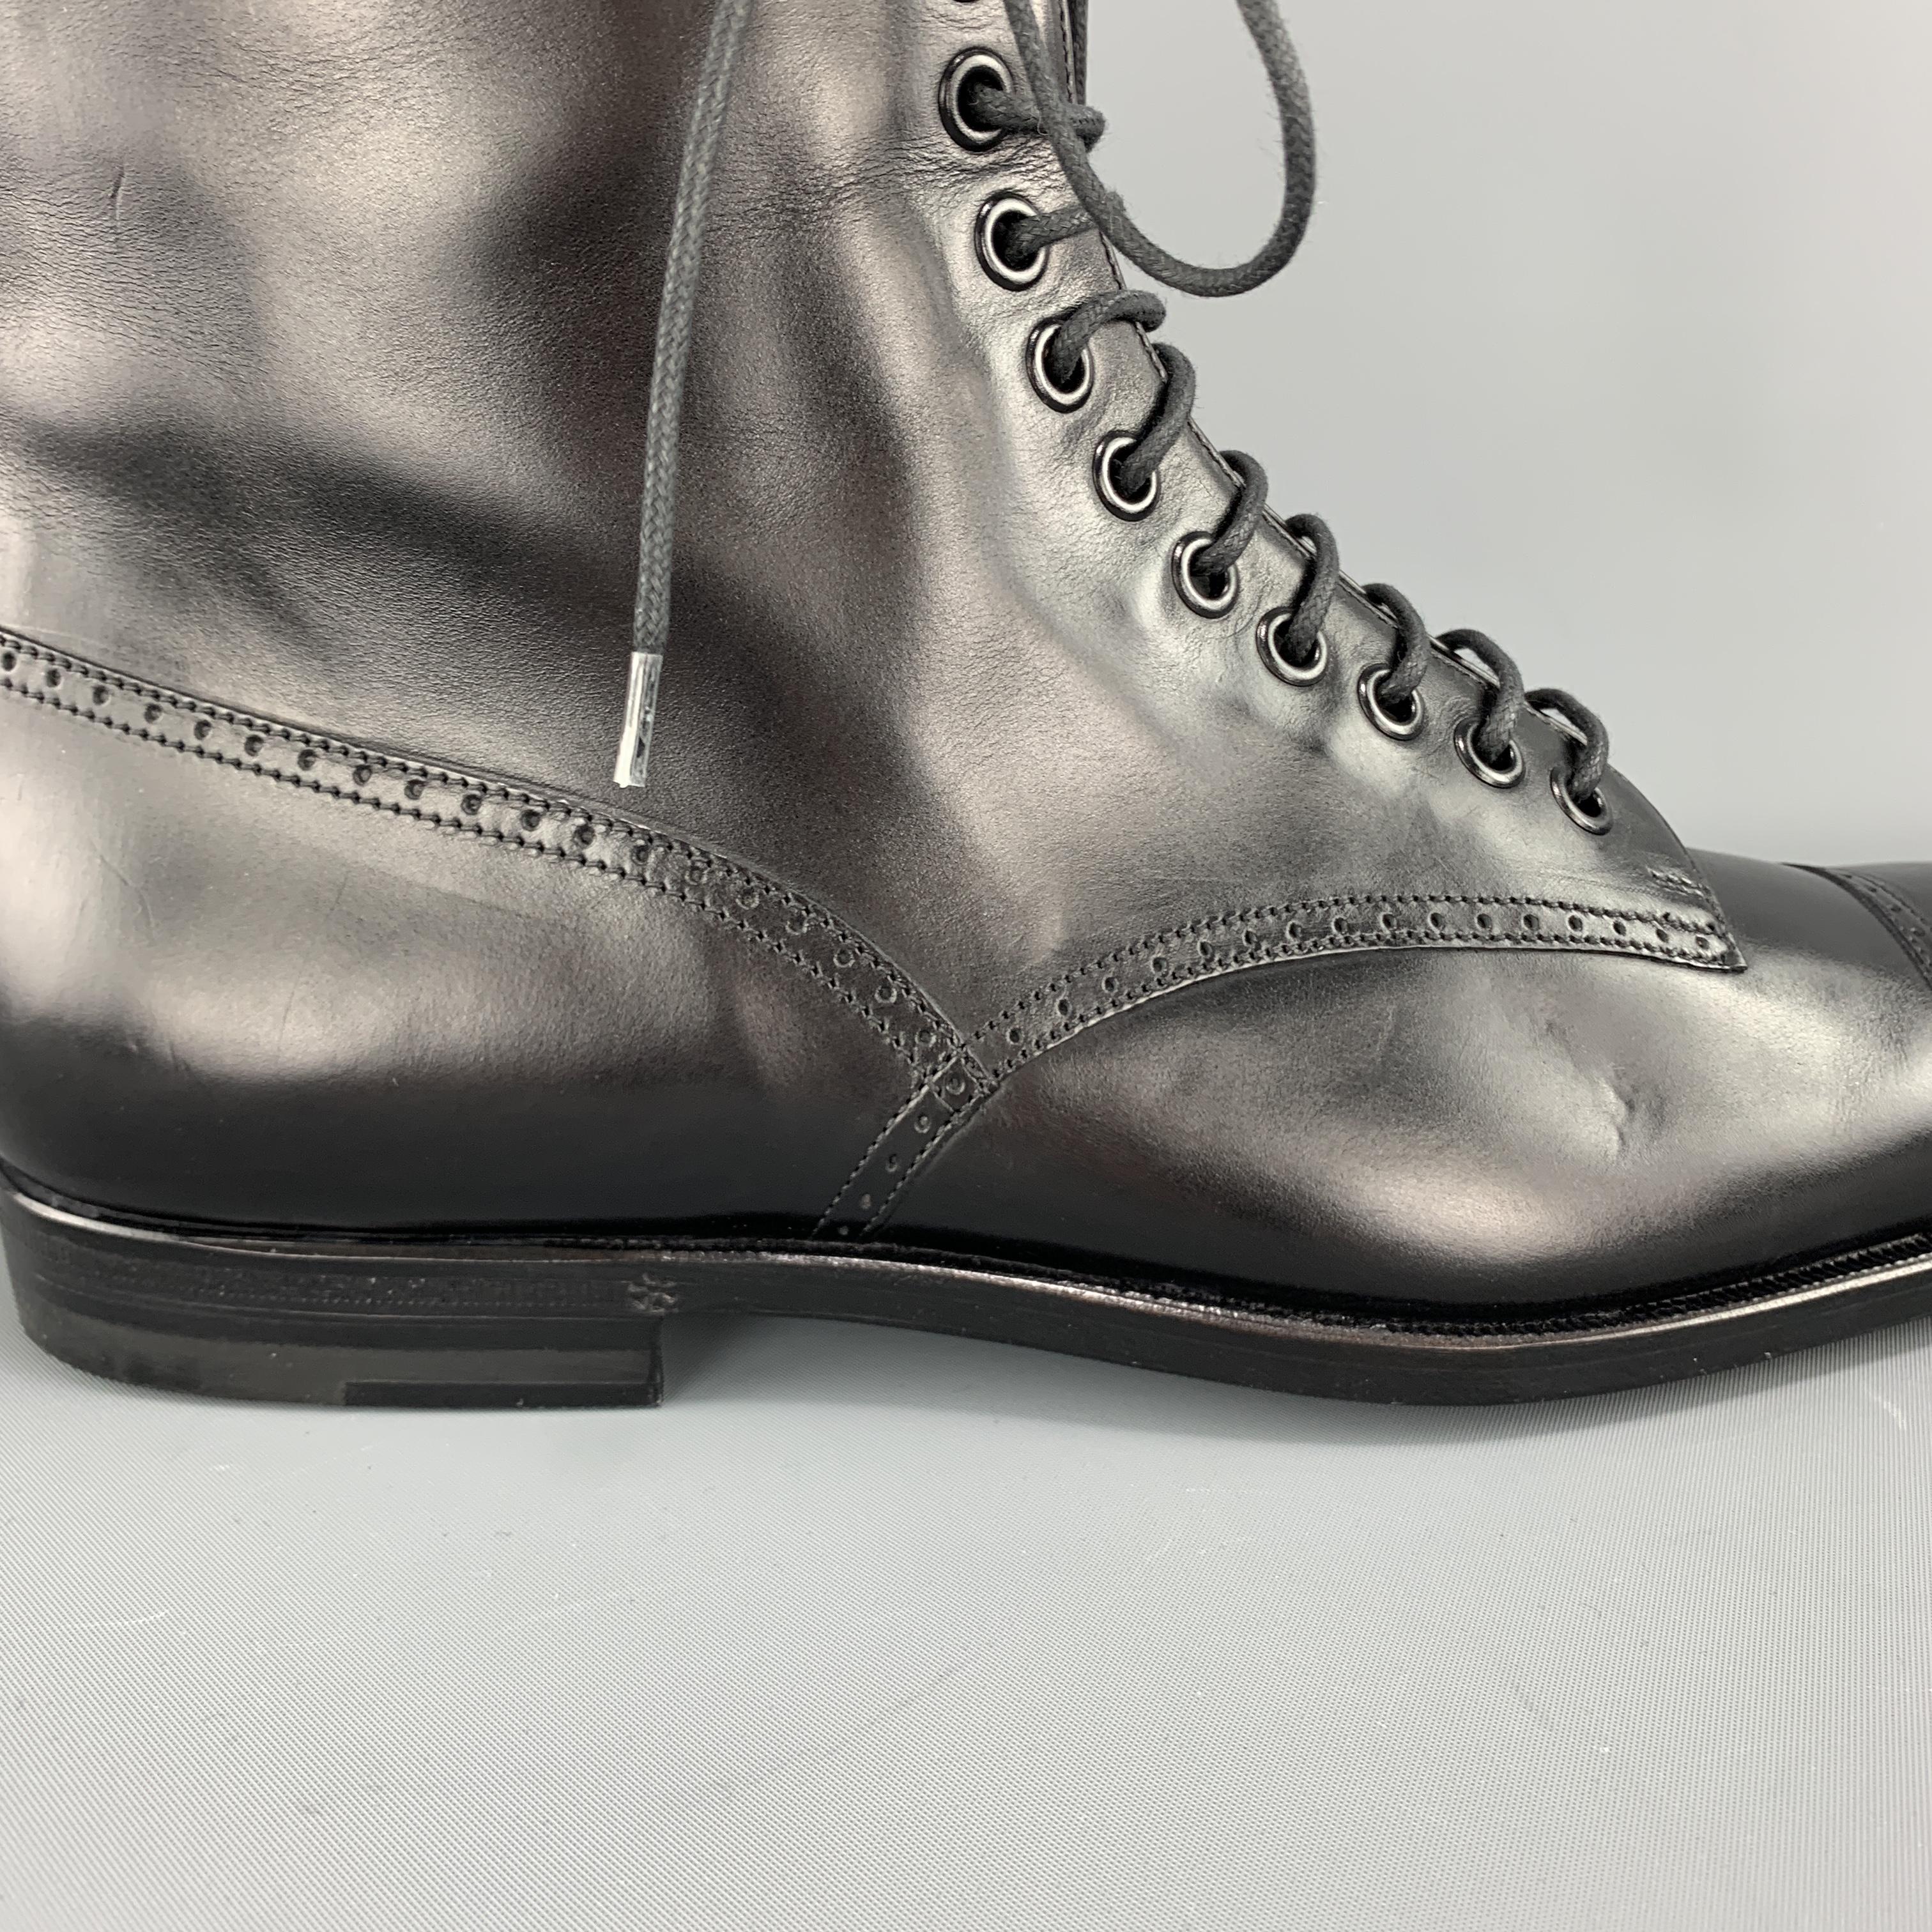 GUCCI combat style boots come in smooth black leather with perforated brogue trim and black eyelet lace up front. Made in Italy.

Brand New. 
Marked: UK 7 1/2 

Outsole: 11.5 x 3.5 in.
Height: 9.5 in. 